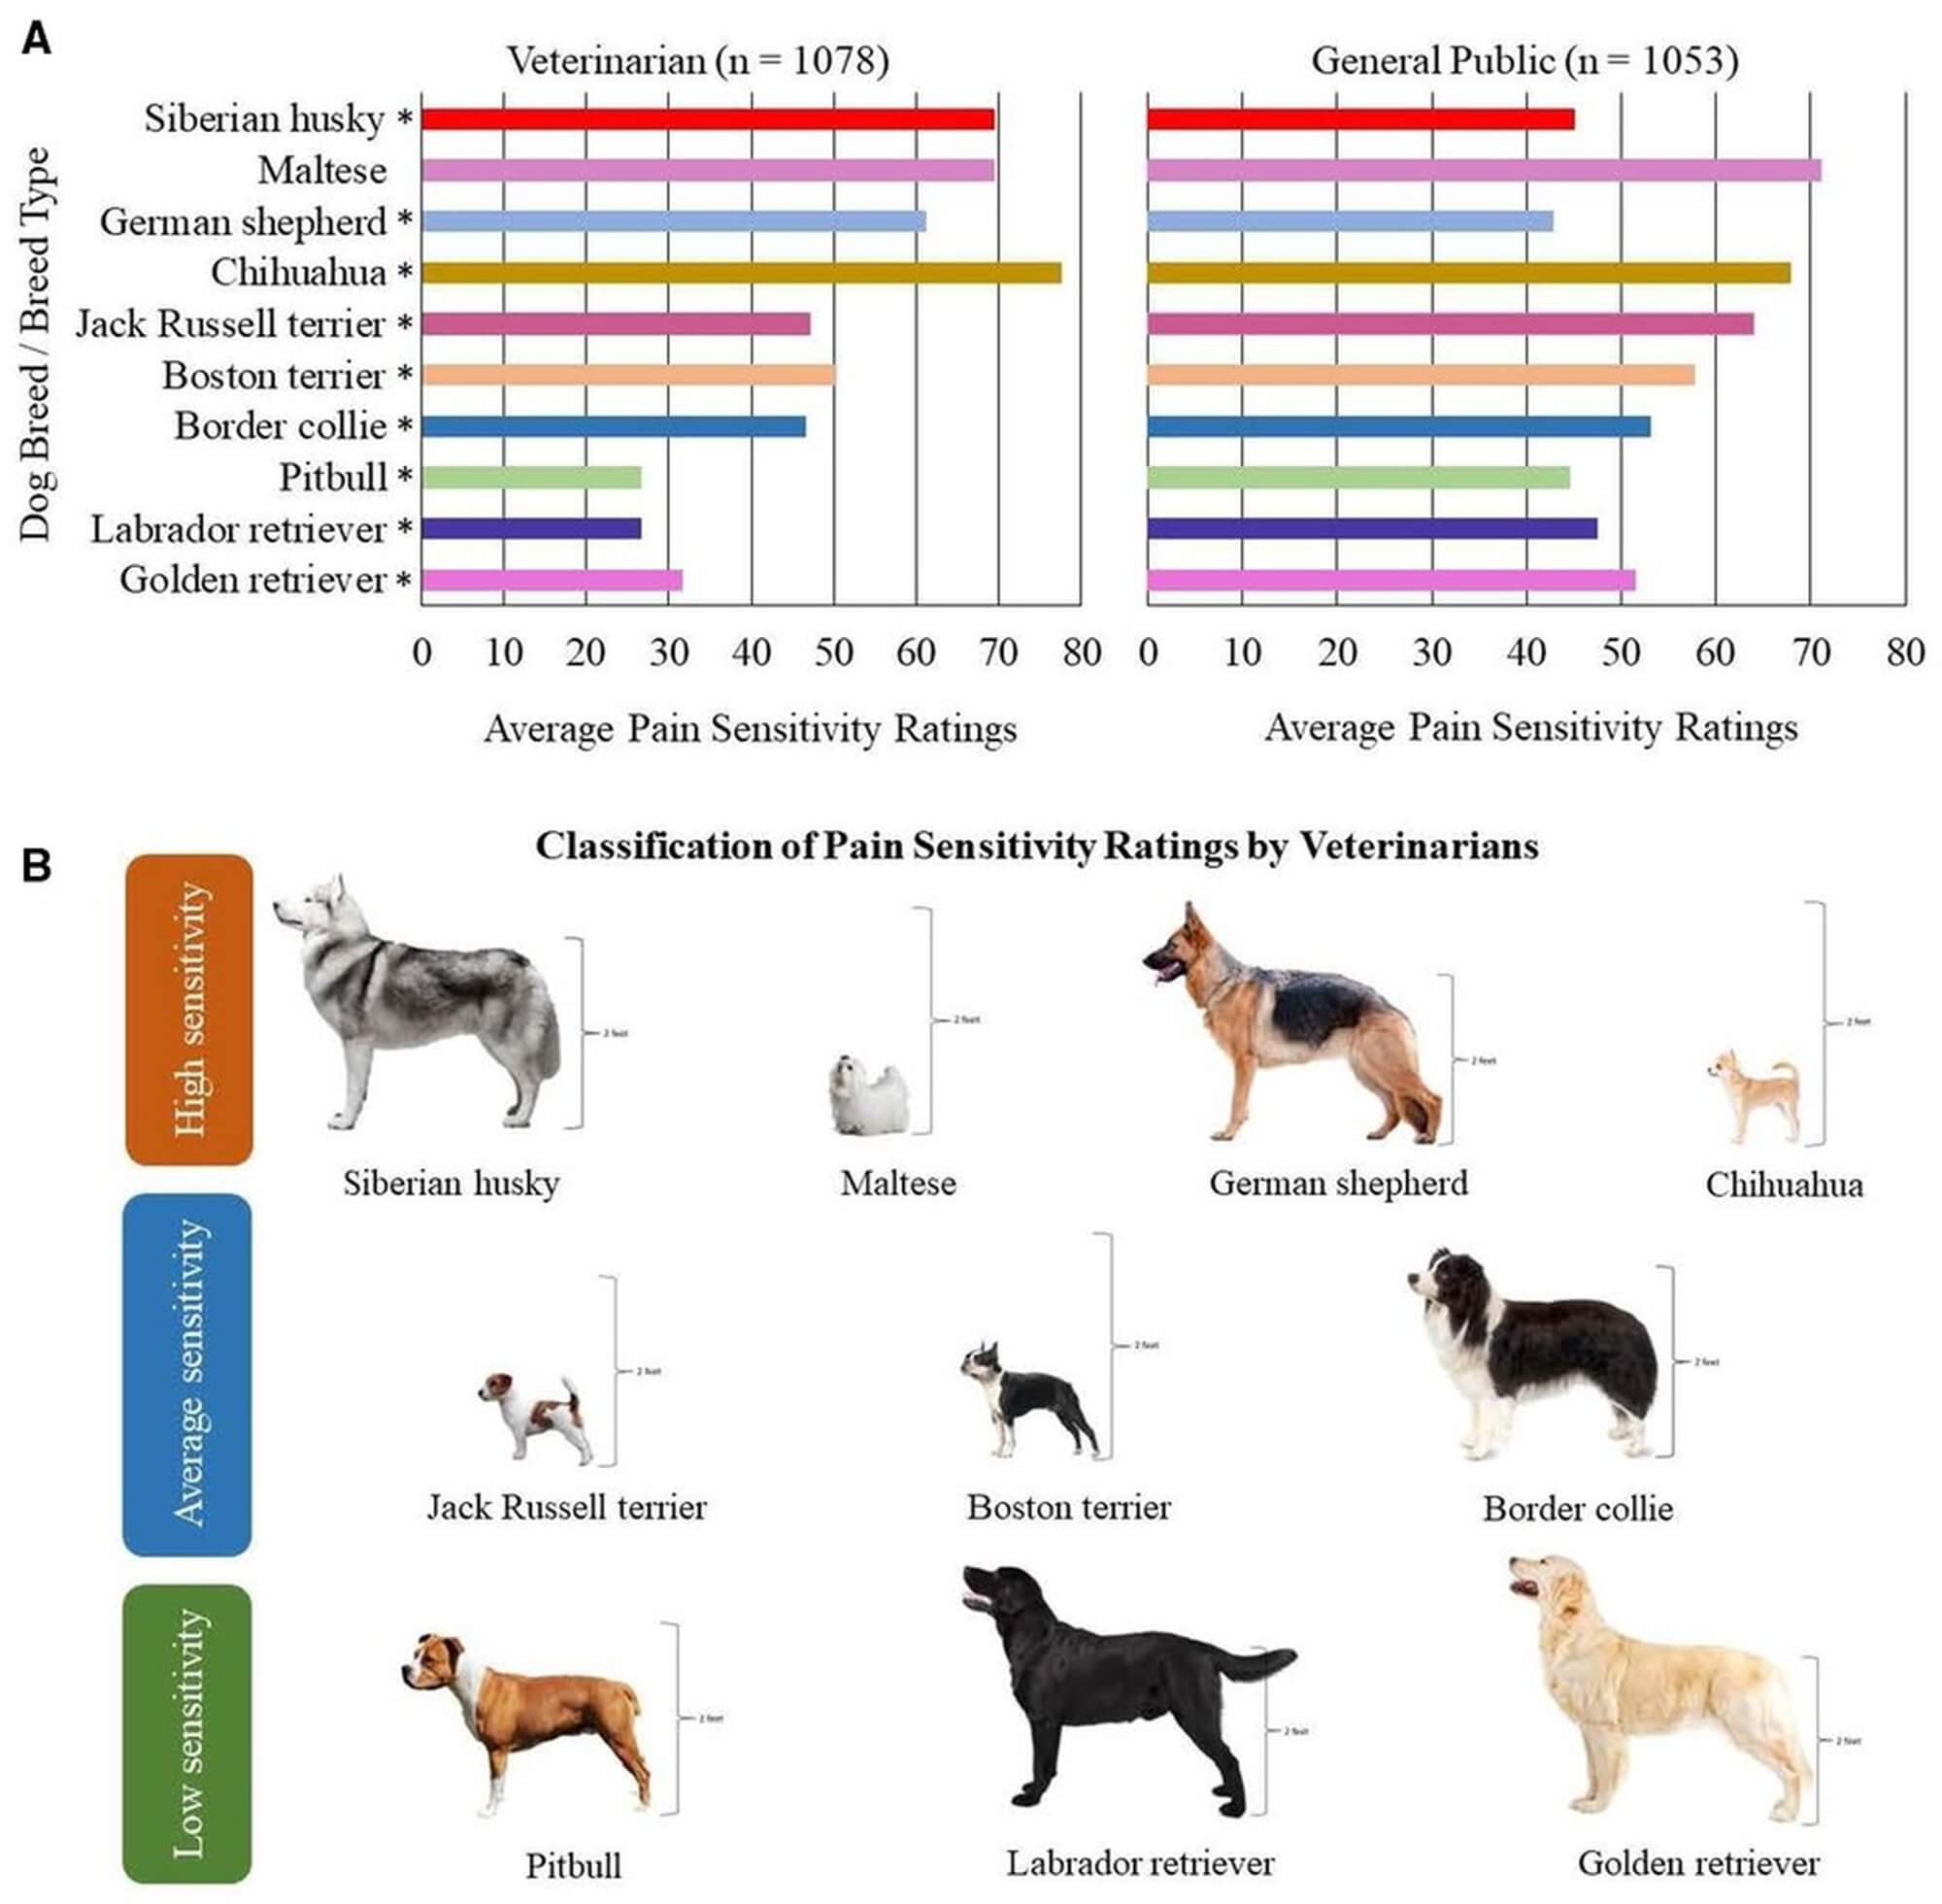 Figure 1. Ten dog breeds/breed types selected for study.  (A) Findings of Gruen et al.  (1) To demonstrate average pain sensitivity ratings by both veterinarians and the public for 10 selected dog breeds. The scale ranges from 0 = not sensitive at all to 100 = most sensitive imaginable. In Gruen et al., (1), median pain sensitivity ratings between veterinarians and the general public were compared using a two-sample t-test, with p-values ​​= 0.001 indicated using asterisks. .